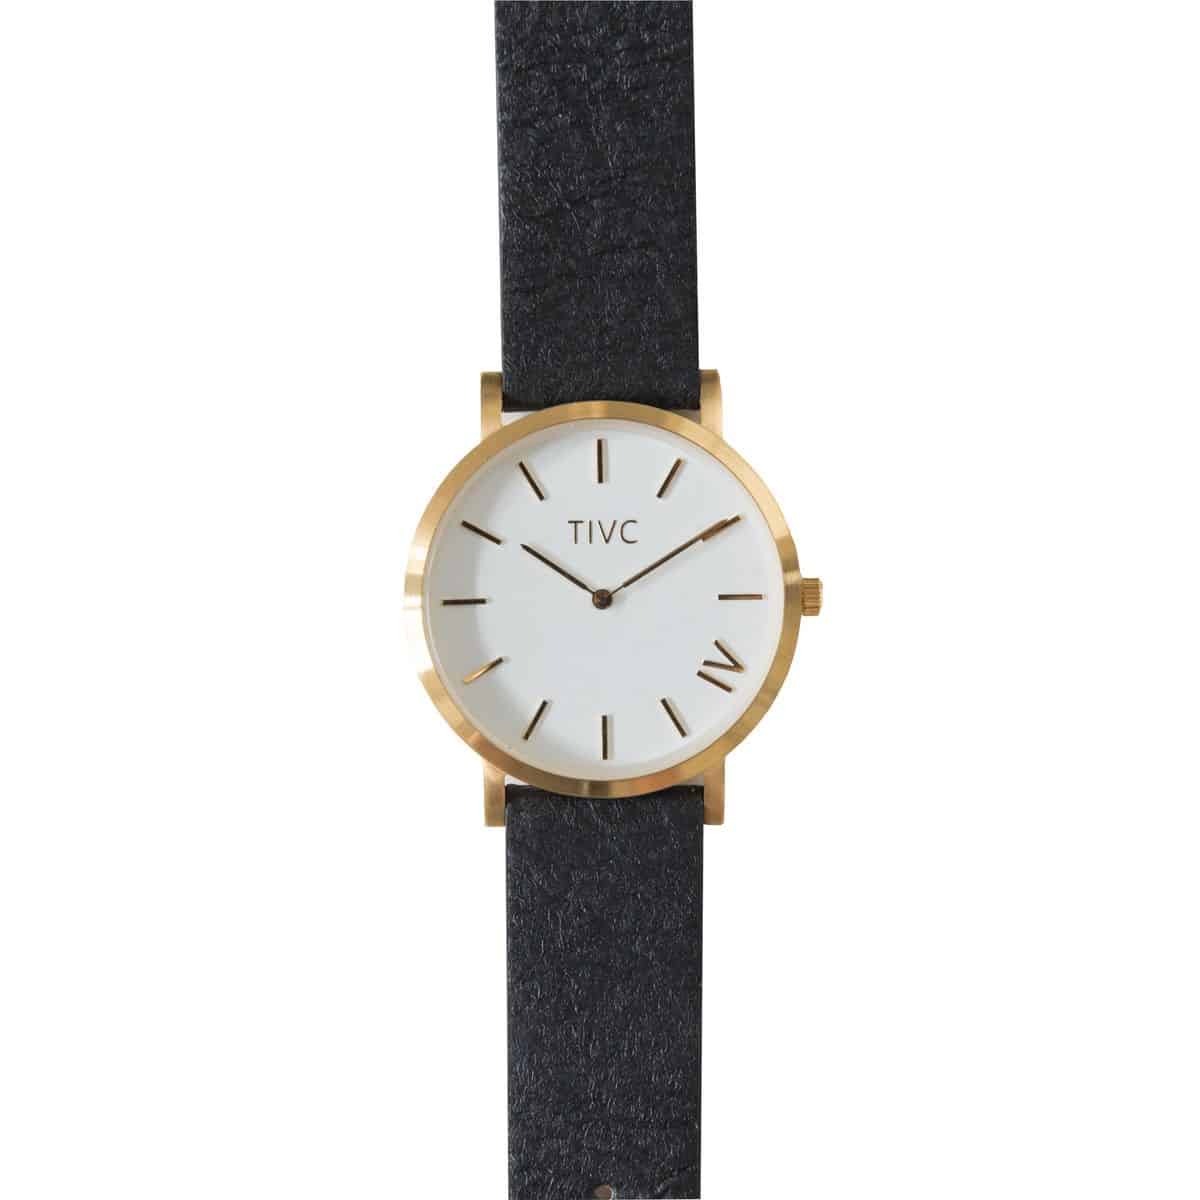 Minimalist watch with white dial, gold hardware, black strap